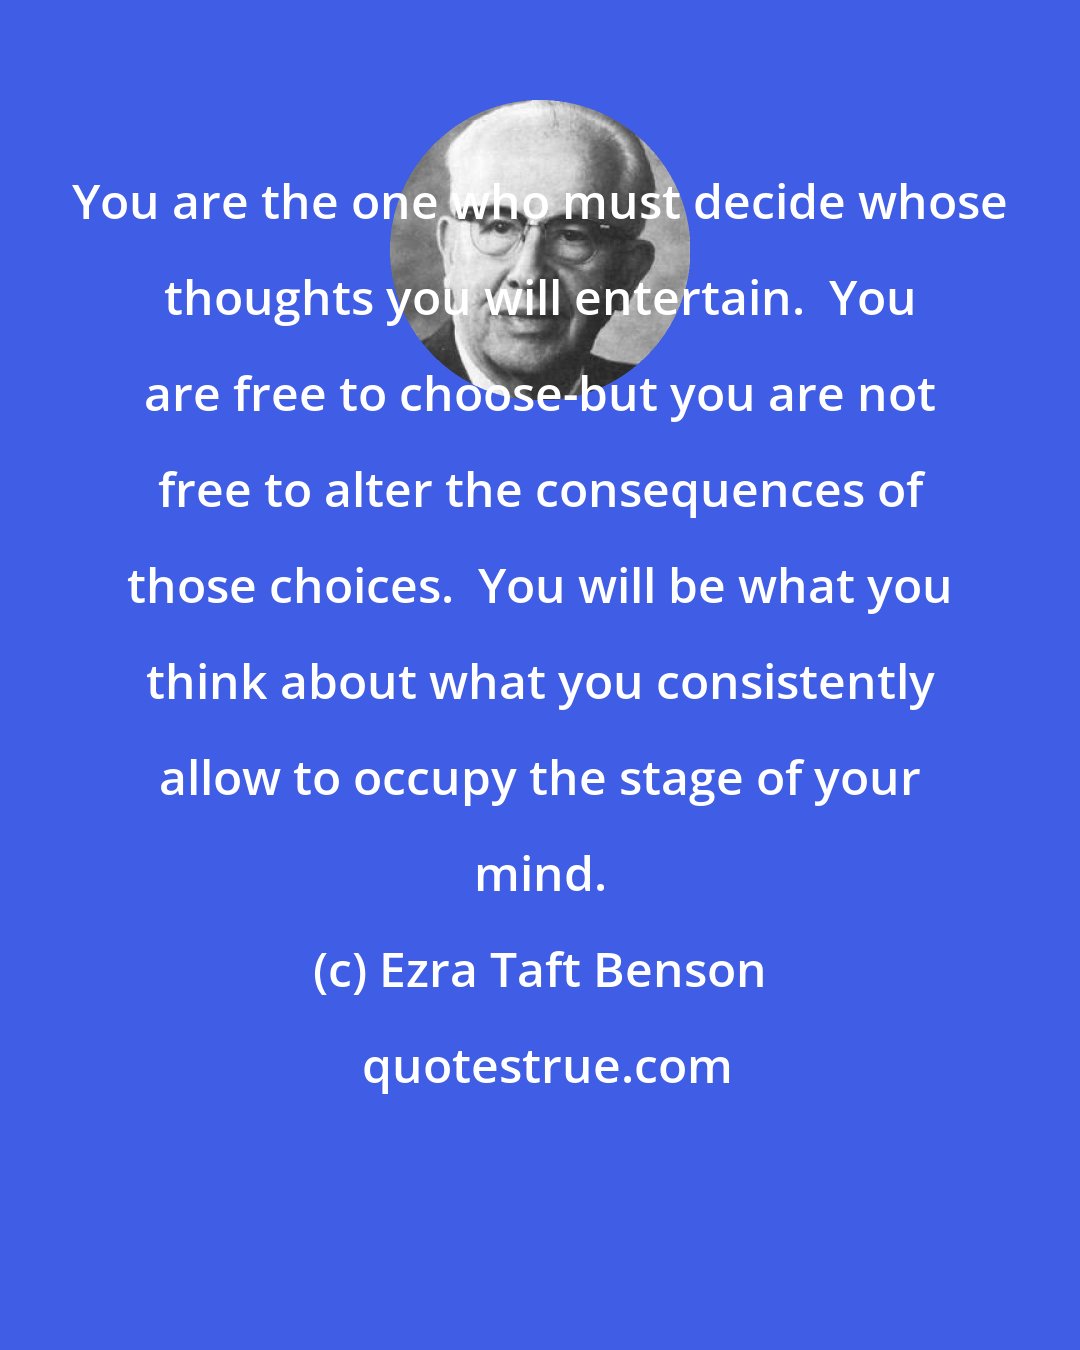 Ezra Taft Benson: You are the one who must decide whose thoughts you will entertain.  You are free to choose-but you are not free to alter the consequences of those choices.  You will be what you think about what you consistently allow to occupy the stage of your mind.